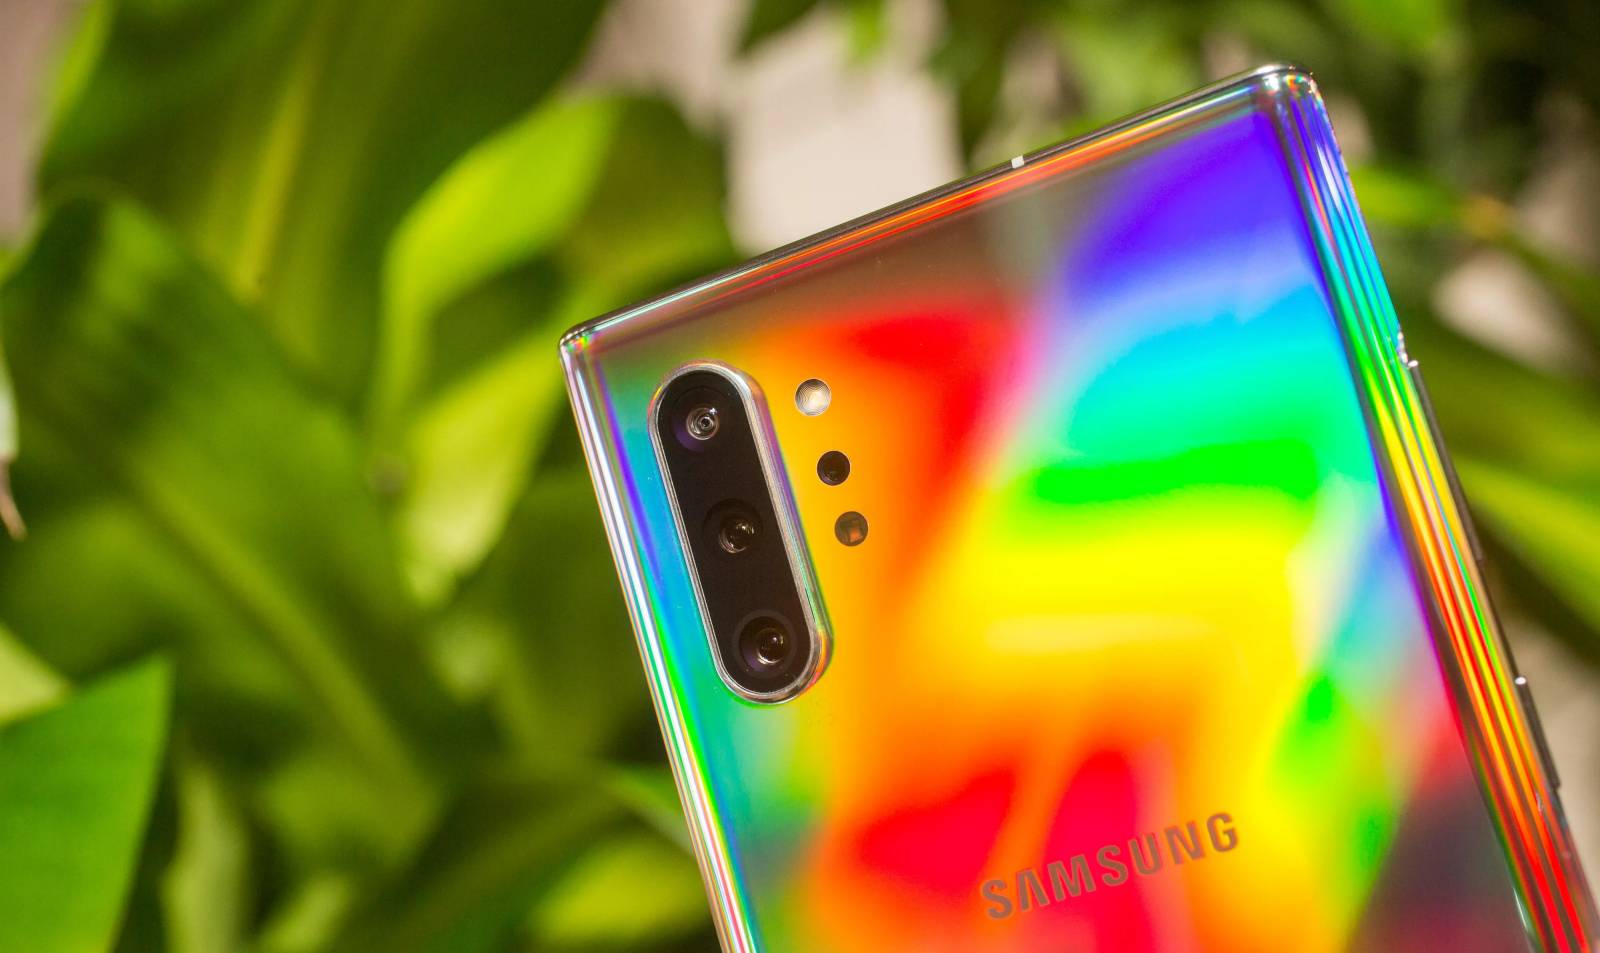 eMAG Samsung GALAXY NOTE 10 REDUS anul nou